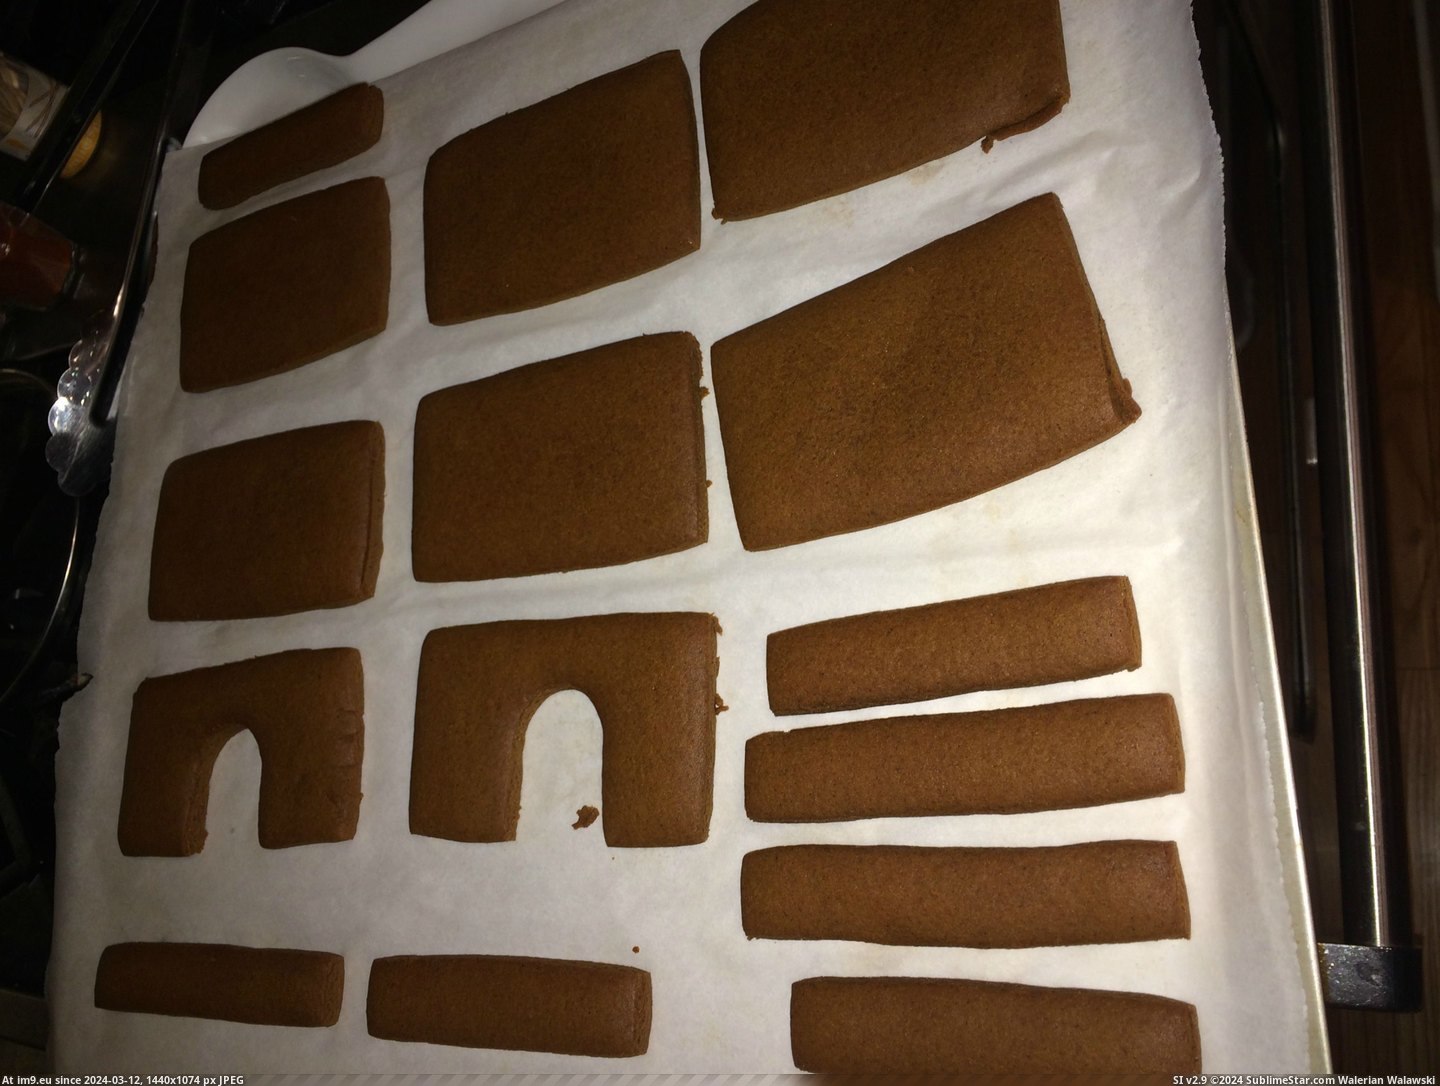 #Husband #Get #Our #Divorced #Collaborated #Project #Gingerbread #Success [Pics] My husband and I collaborated on our first gingerbread project and didn't get divorced...success! 8 Pic. (Изображение из альбом My r/PICS favs))